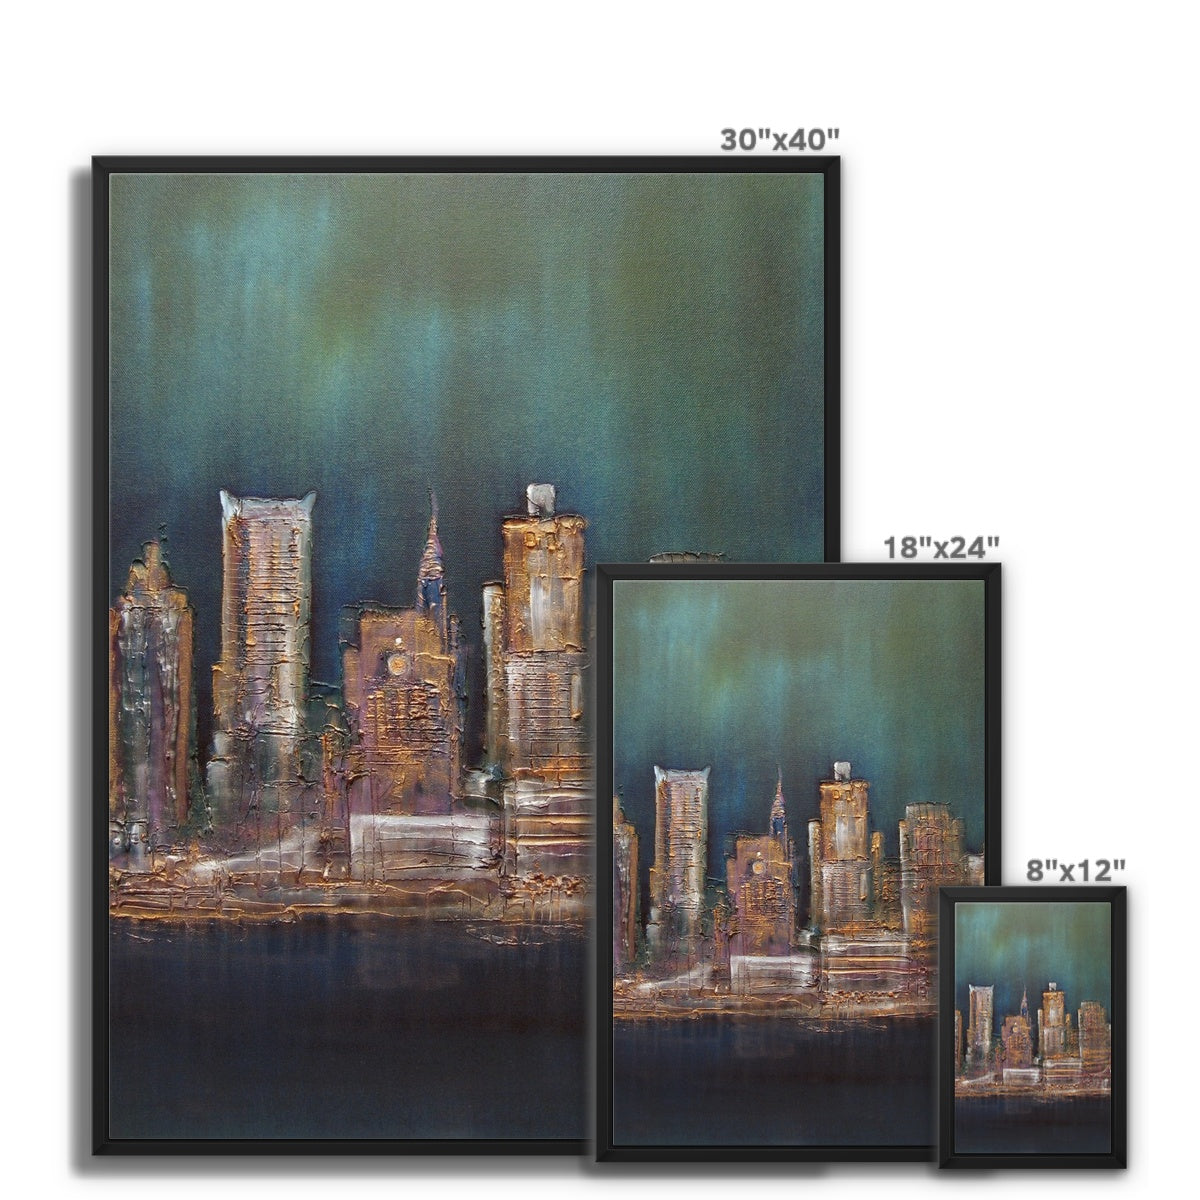 New York West Side Painting | Framed Canvas From Scotland-Floating Framed Canvas Prints-World Art Gallery-Paintings, Prints, Homeware, Art Gifts From Scotland By Scottish Artist Kevin Hunter